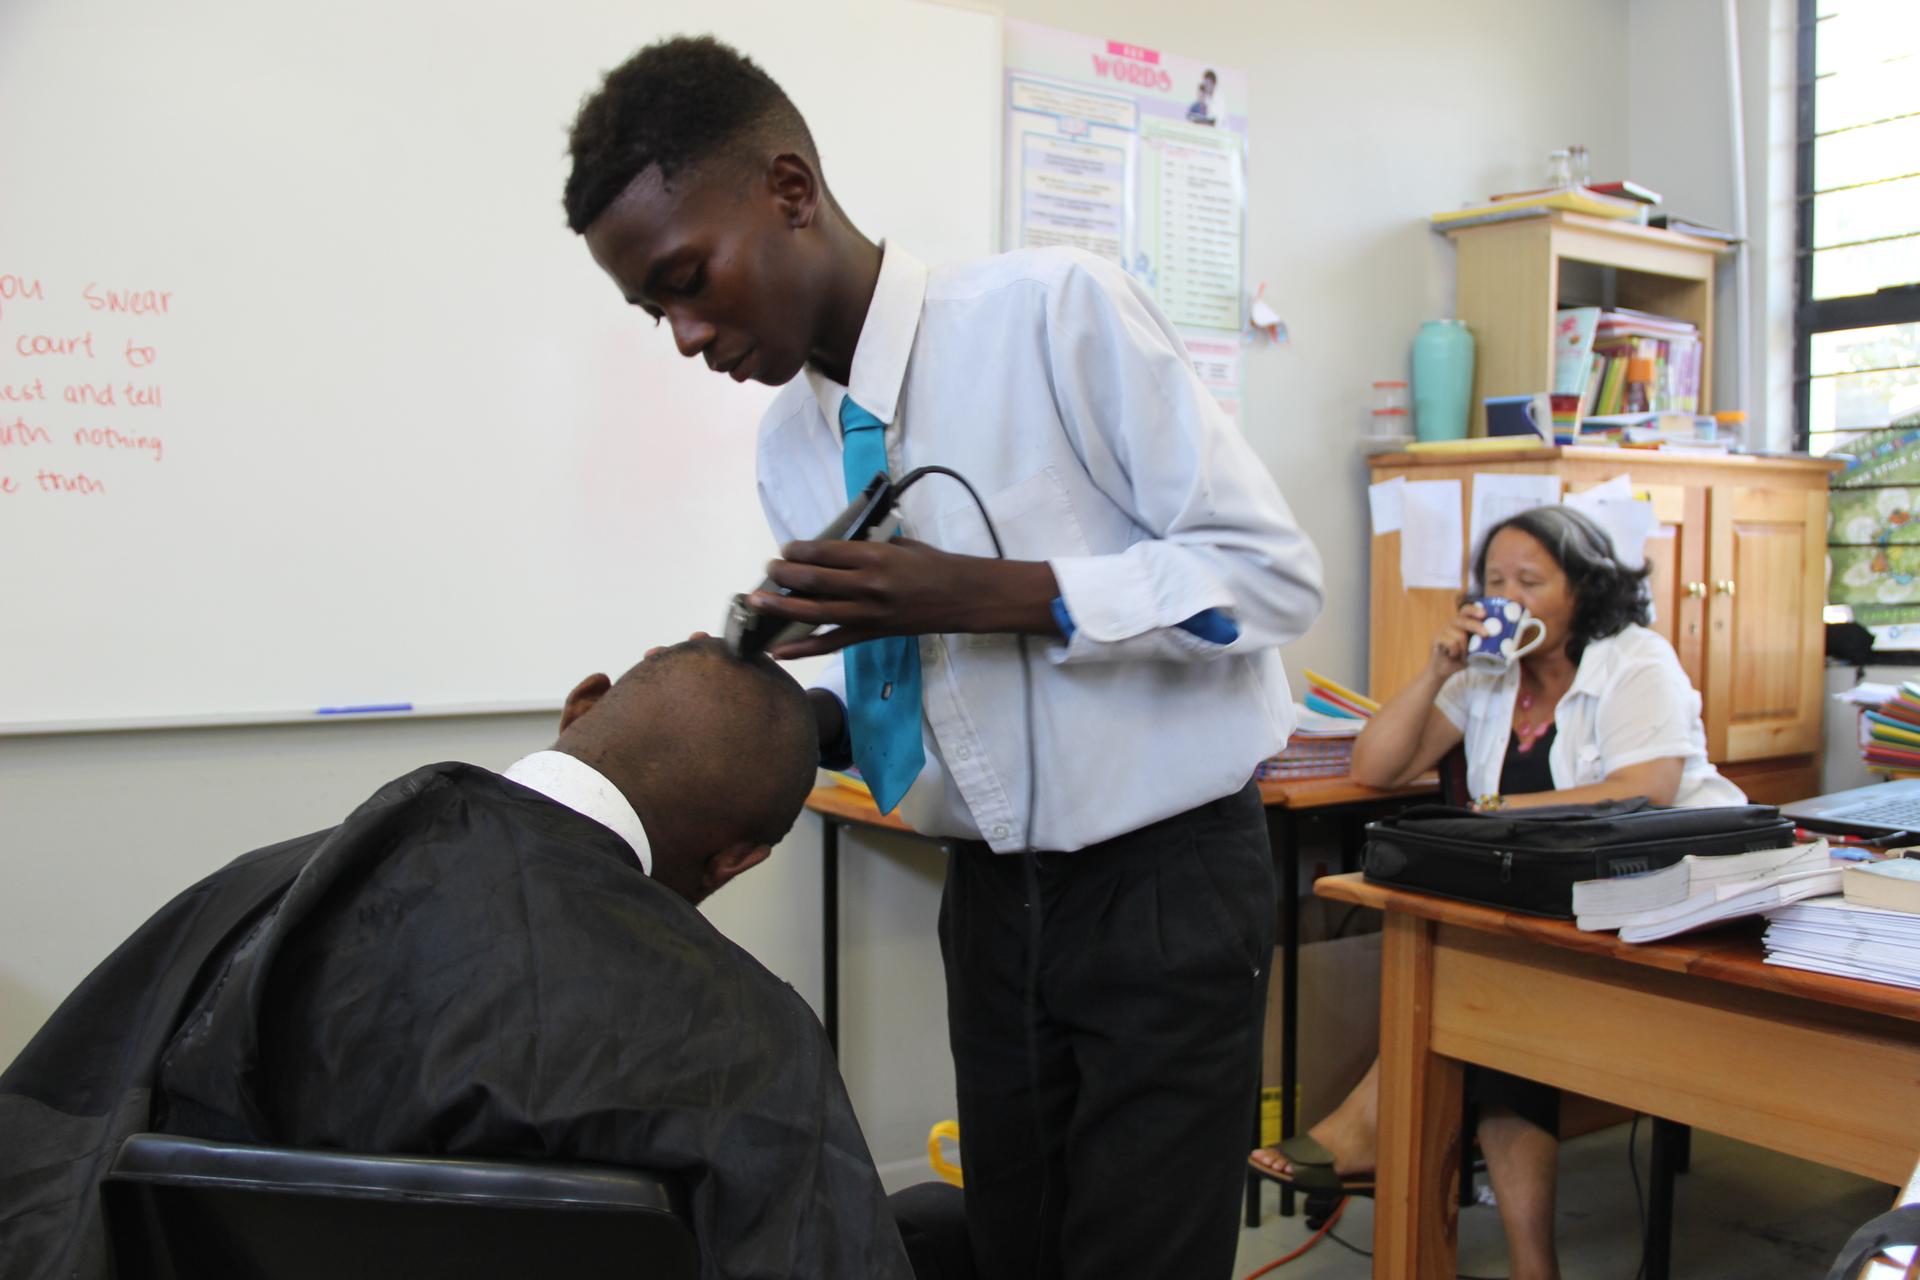 Students at COSAT shave each other's heads